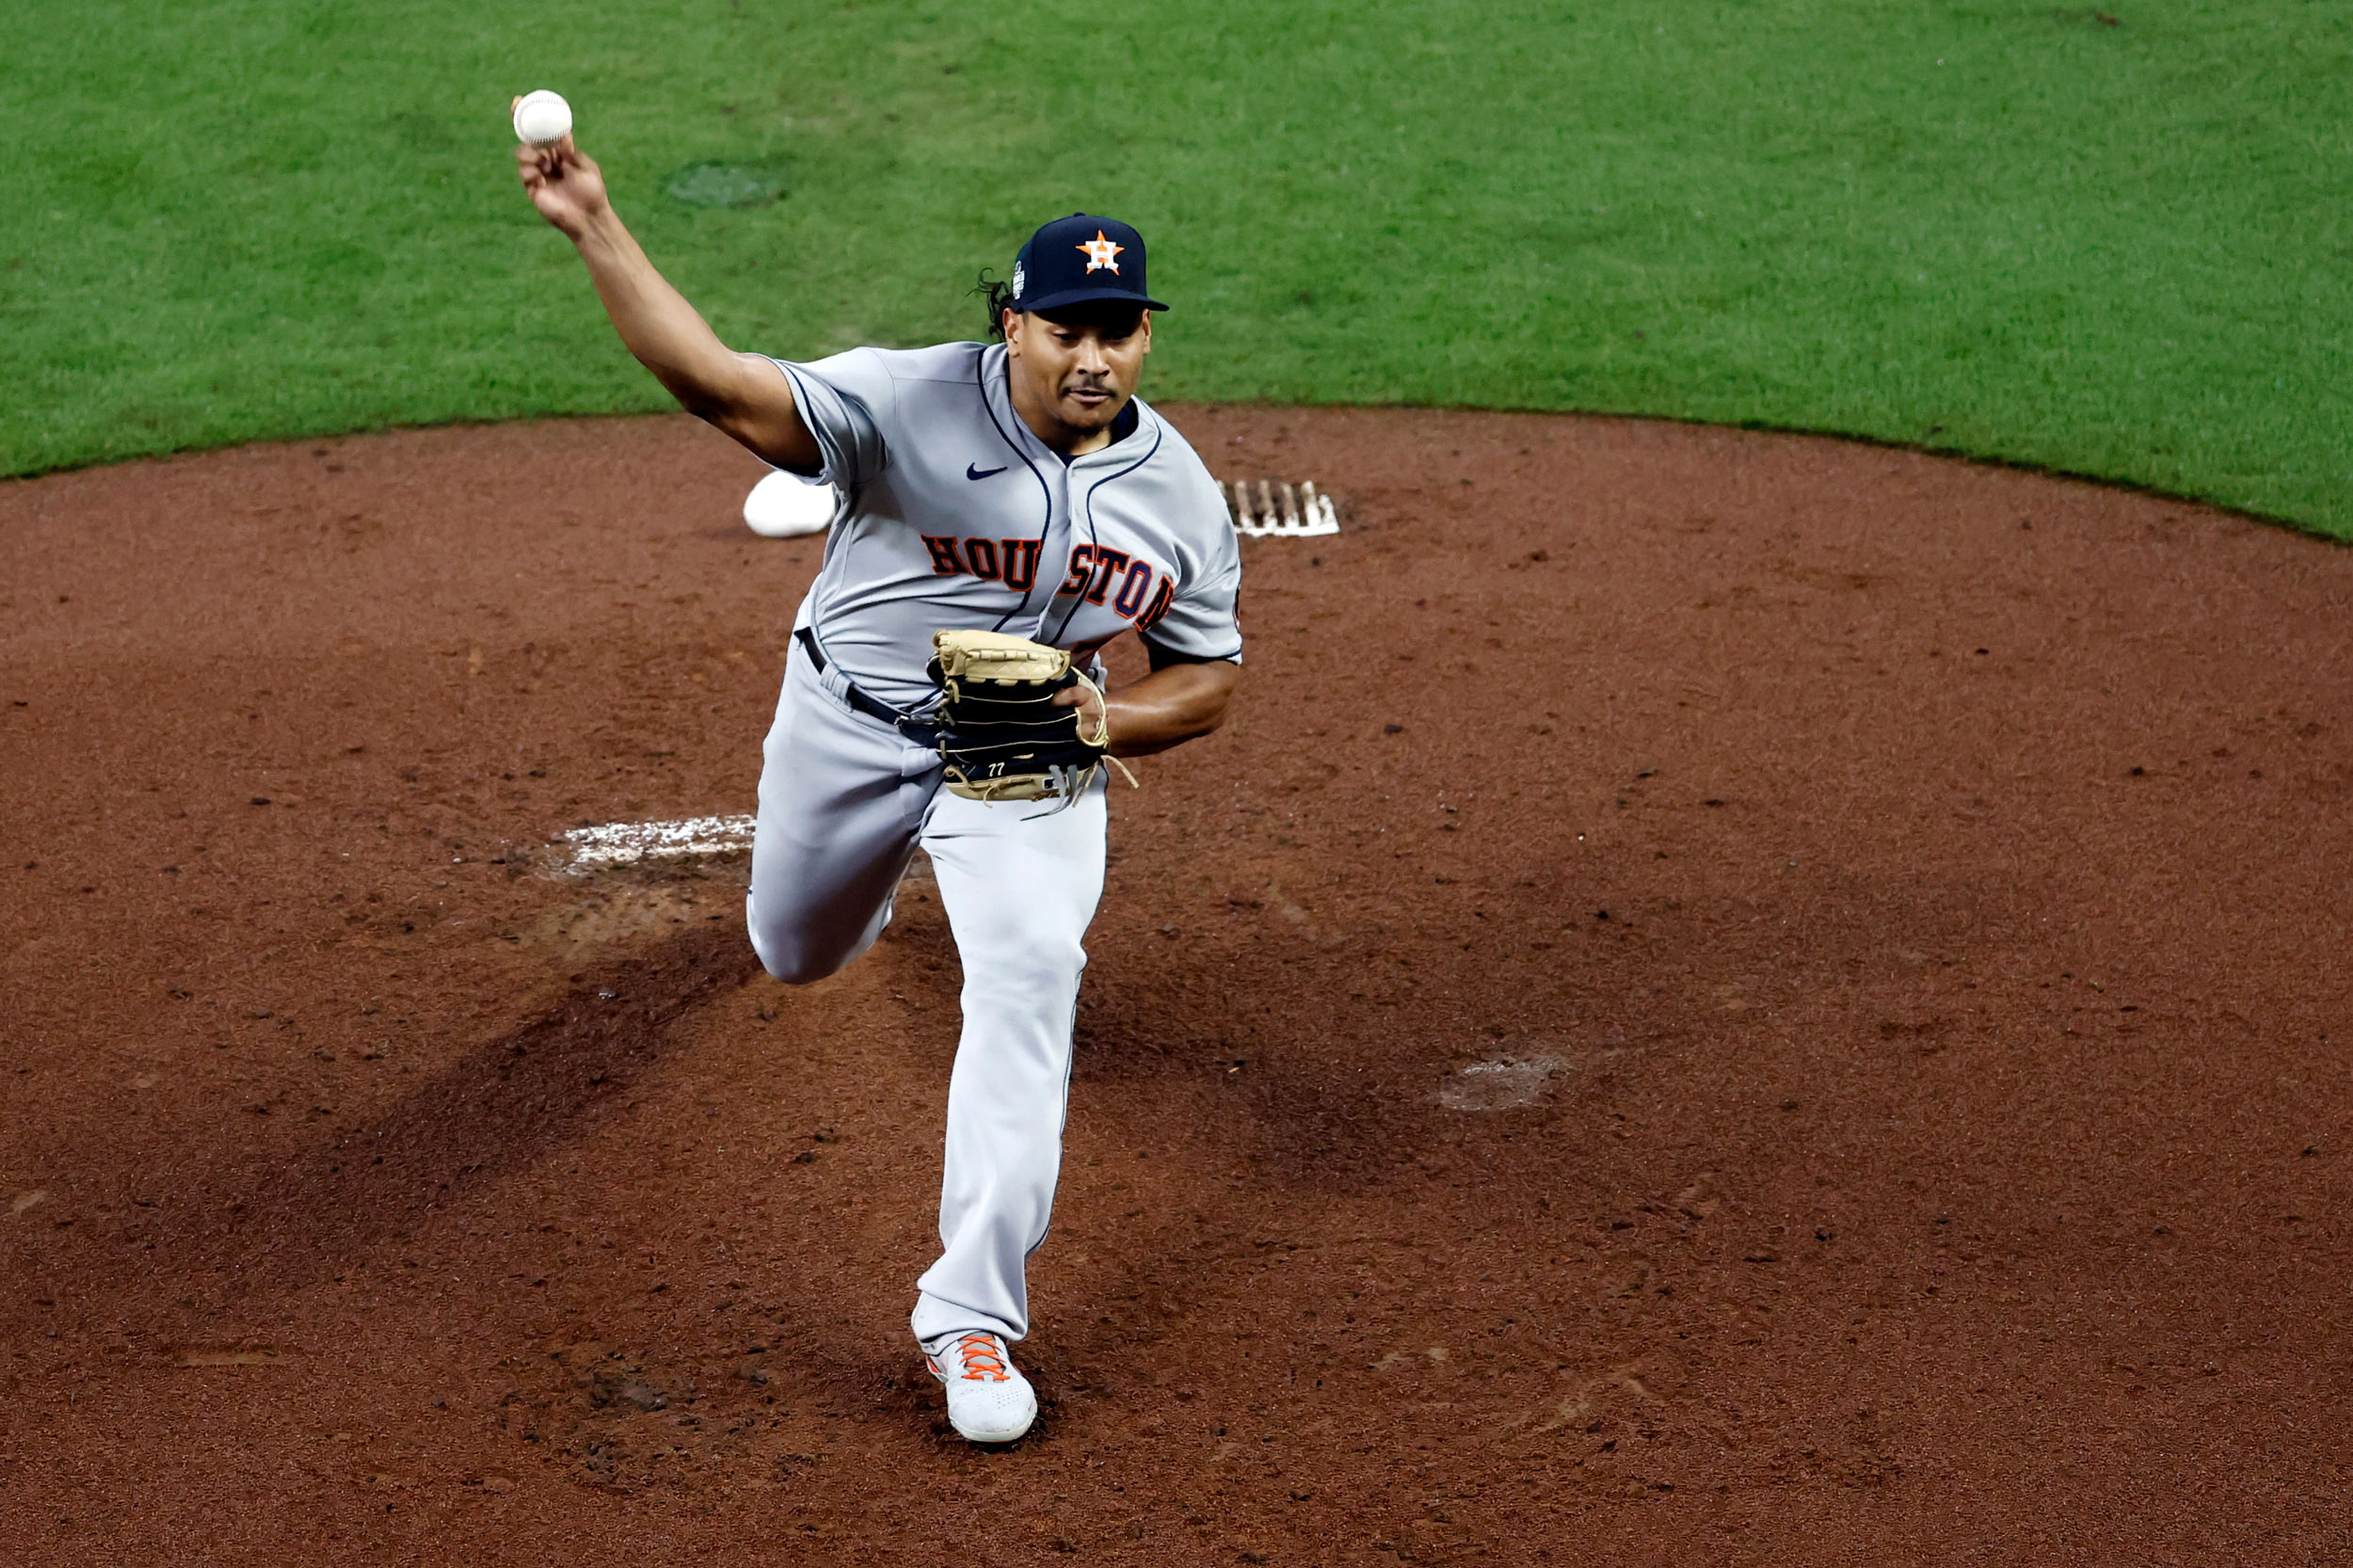 Astros pitcher Luis Garcia delivers a pitch against the Atlanta Braves during the first inning in Game 3 of the World Series at Truist Park on October 29 in Atlanta.